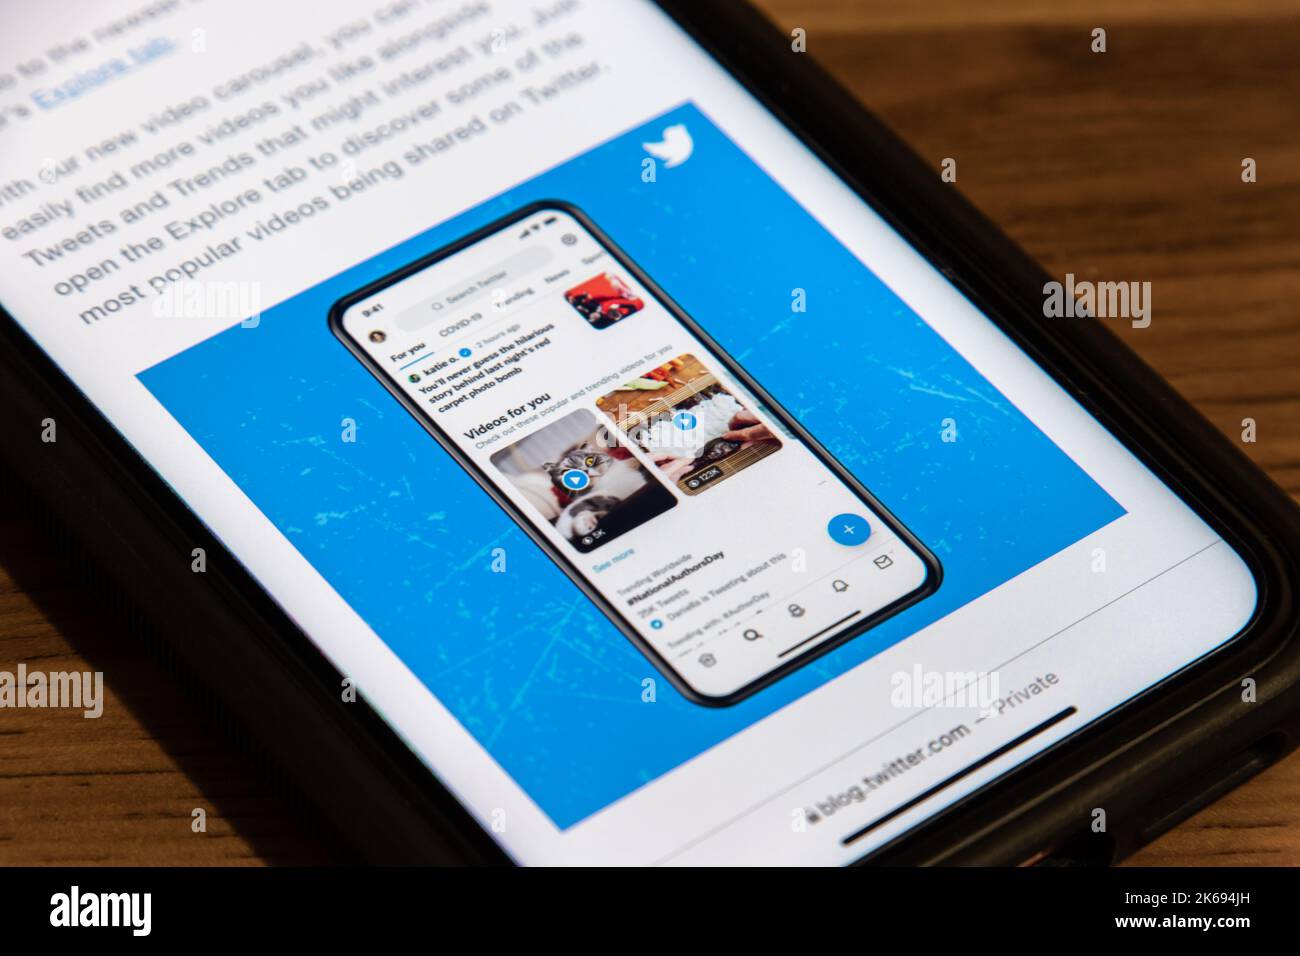 A blog post about Twitter’s new features “Immersive viewing and easy discovery” and “Videos for you” from Twitter blog website on an iPhone. Stock Photo